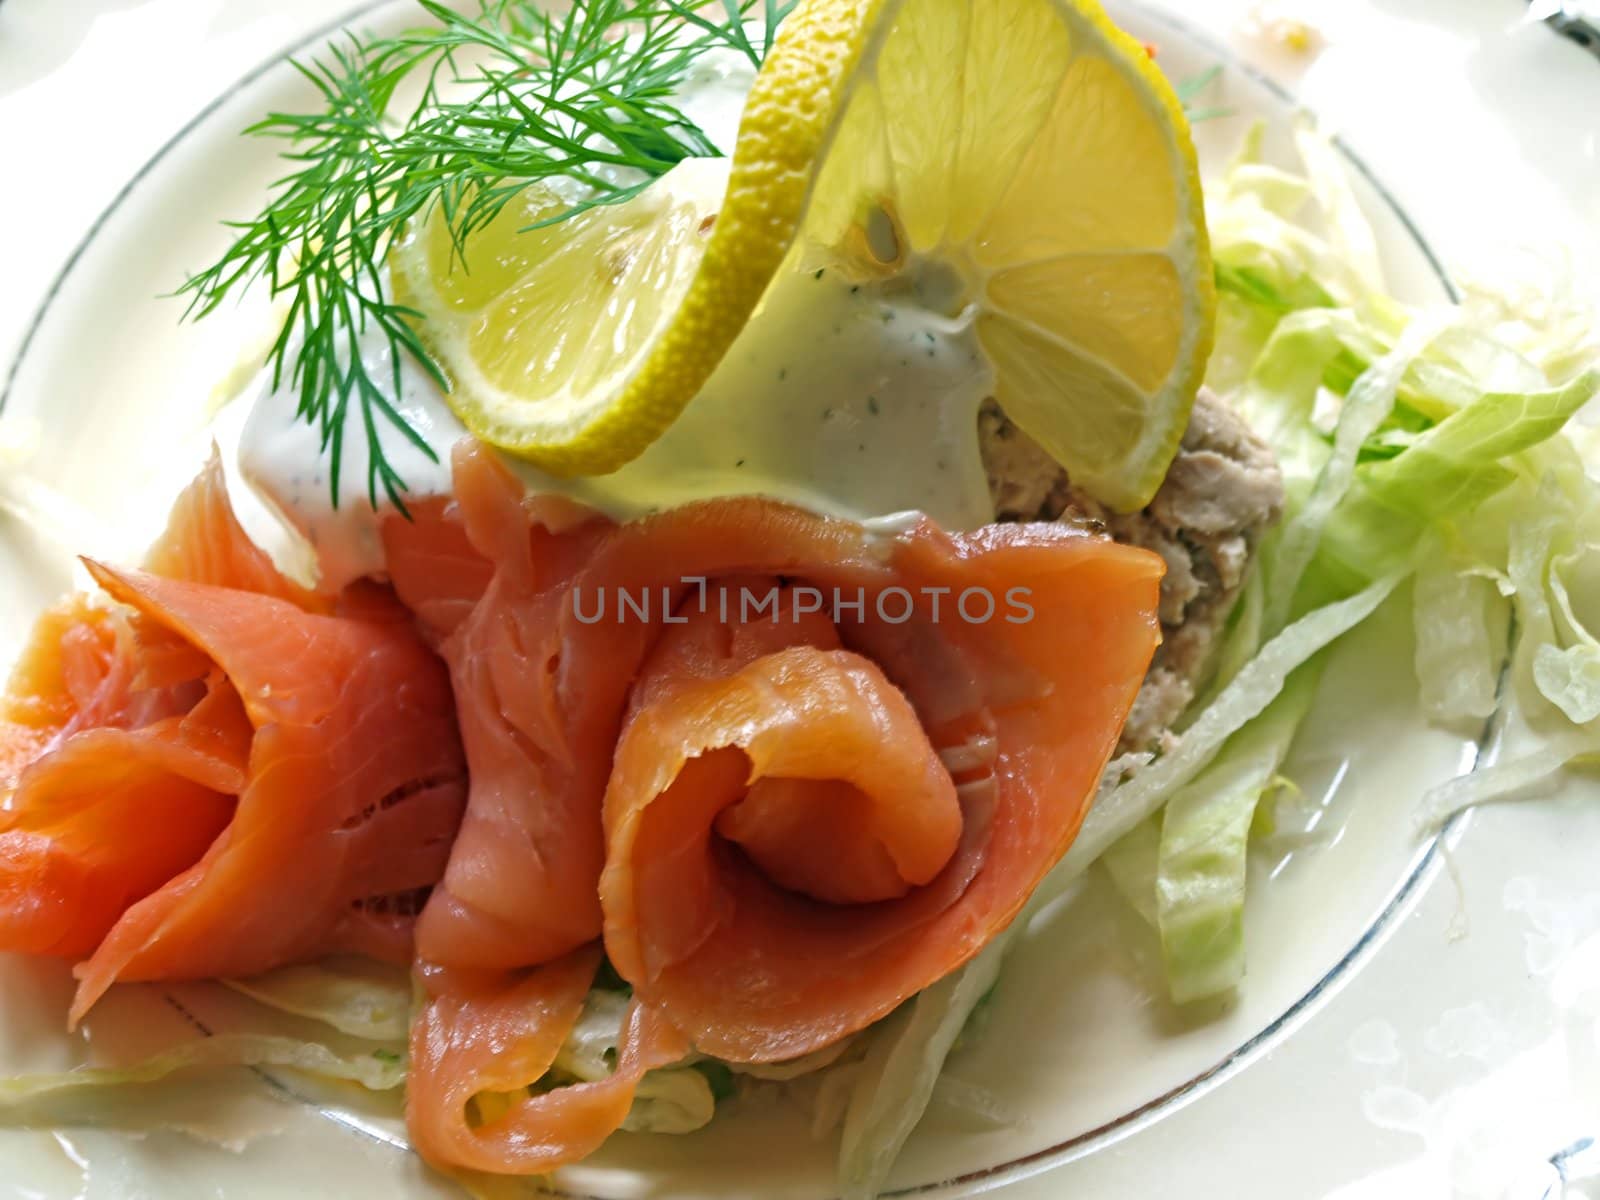 Plate with fresh smoked salmon by Ronyzmbow